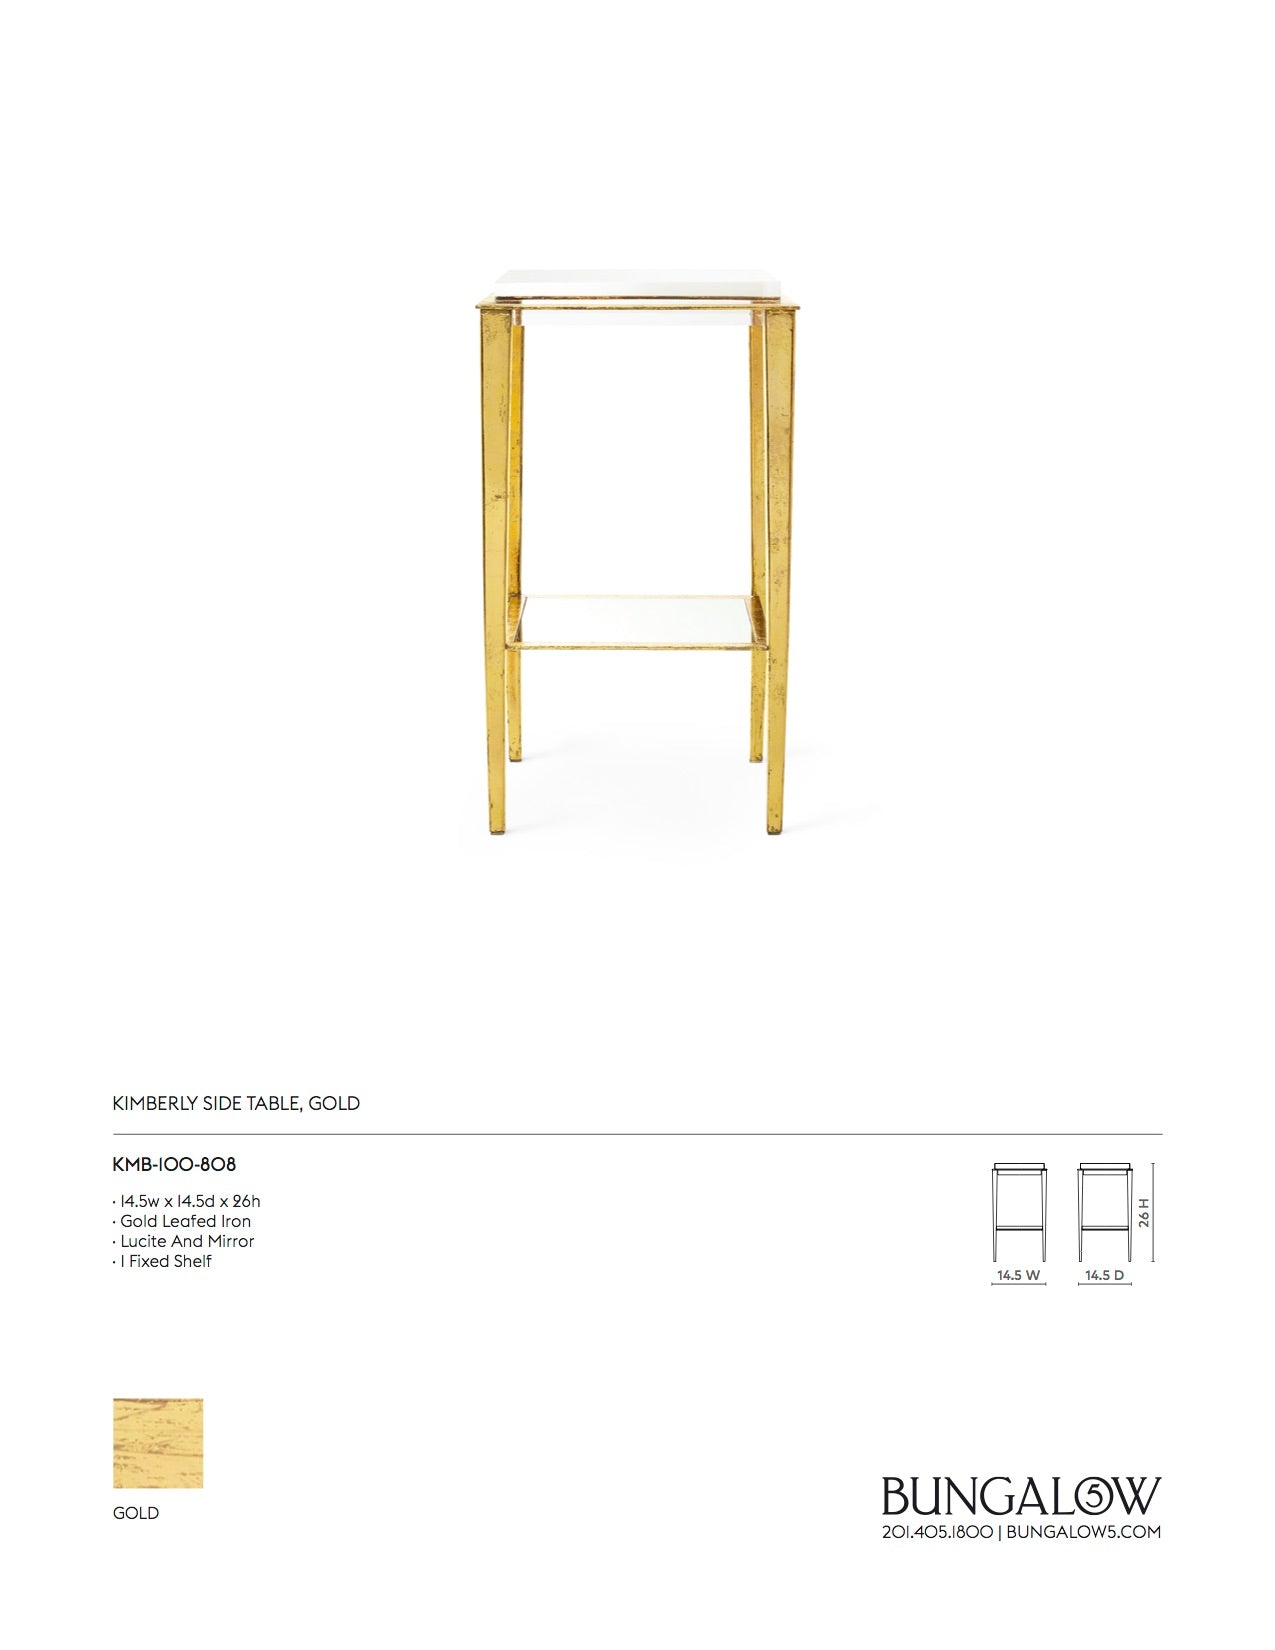 Bungalow 5 Kimberly Side Table Tearsheet